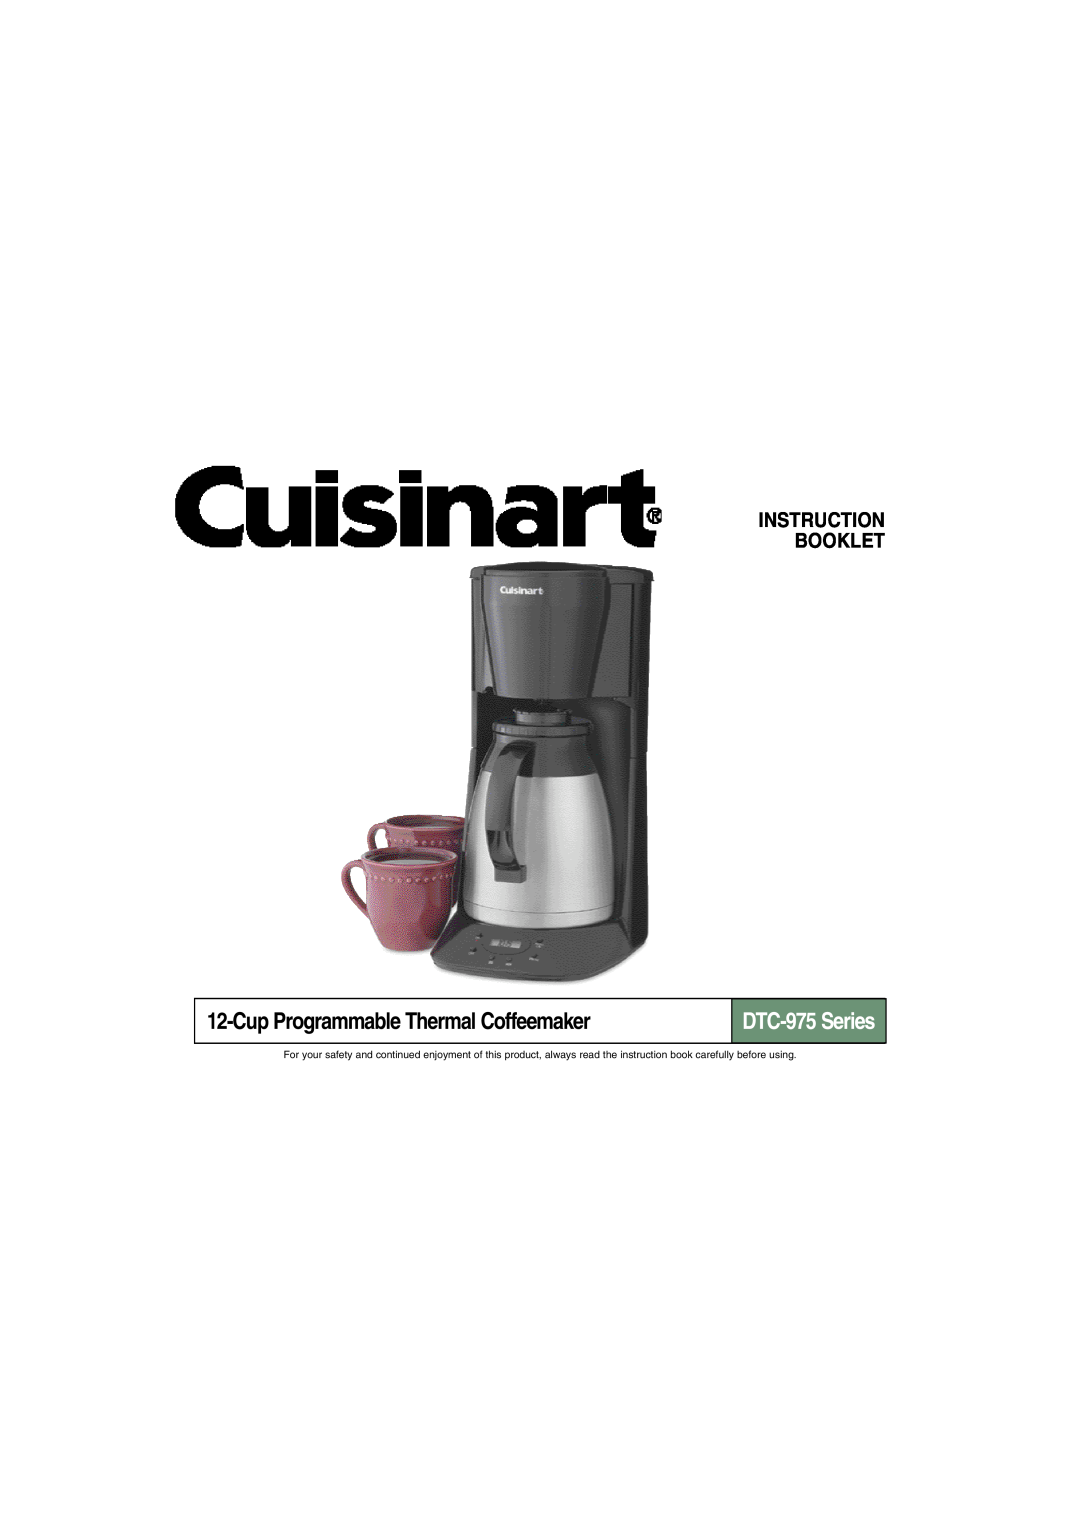 Cuisinart manual Cup Programmable Thermal Coffeemaker, Instruction Booklet, DTC-975 Series 